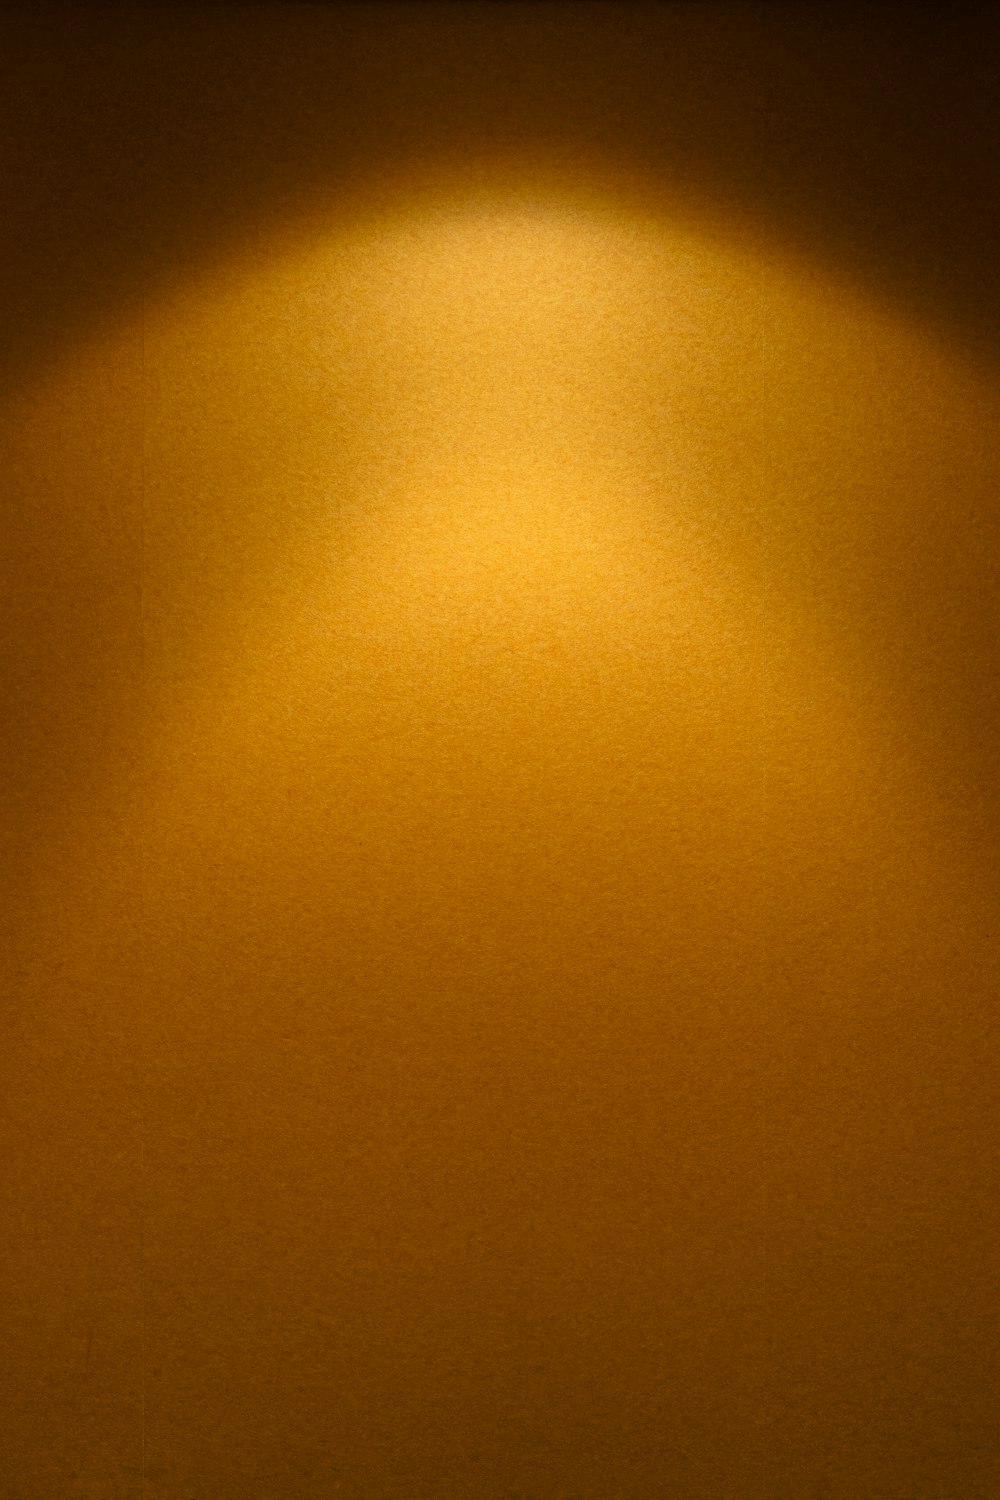 a yellow wall with a light shining on it